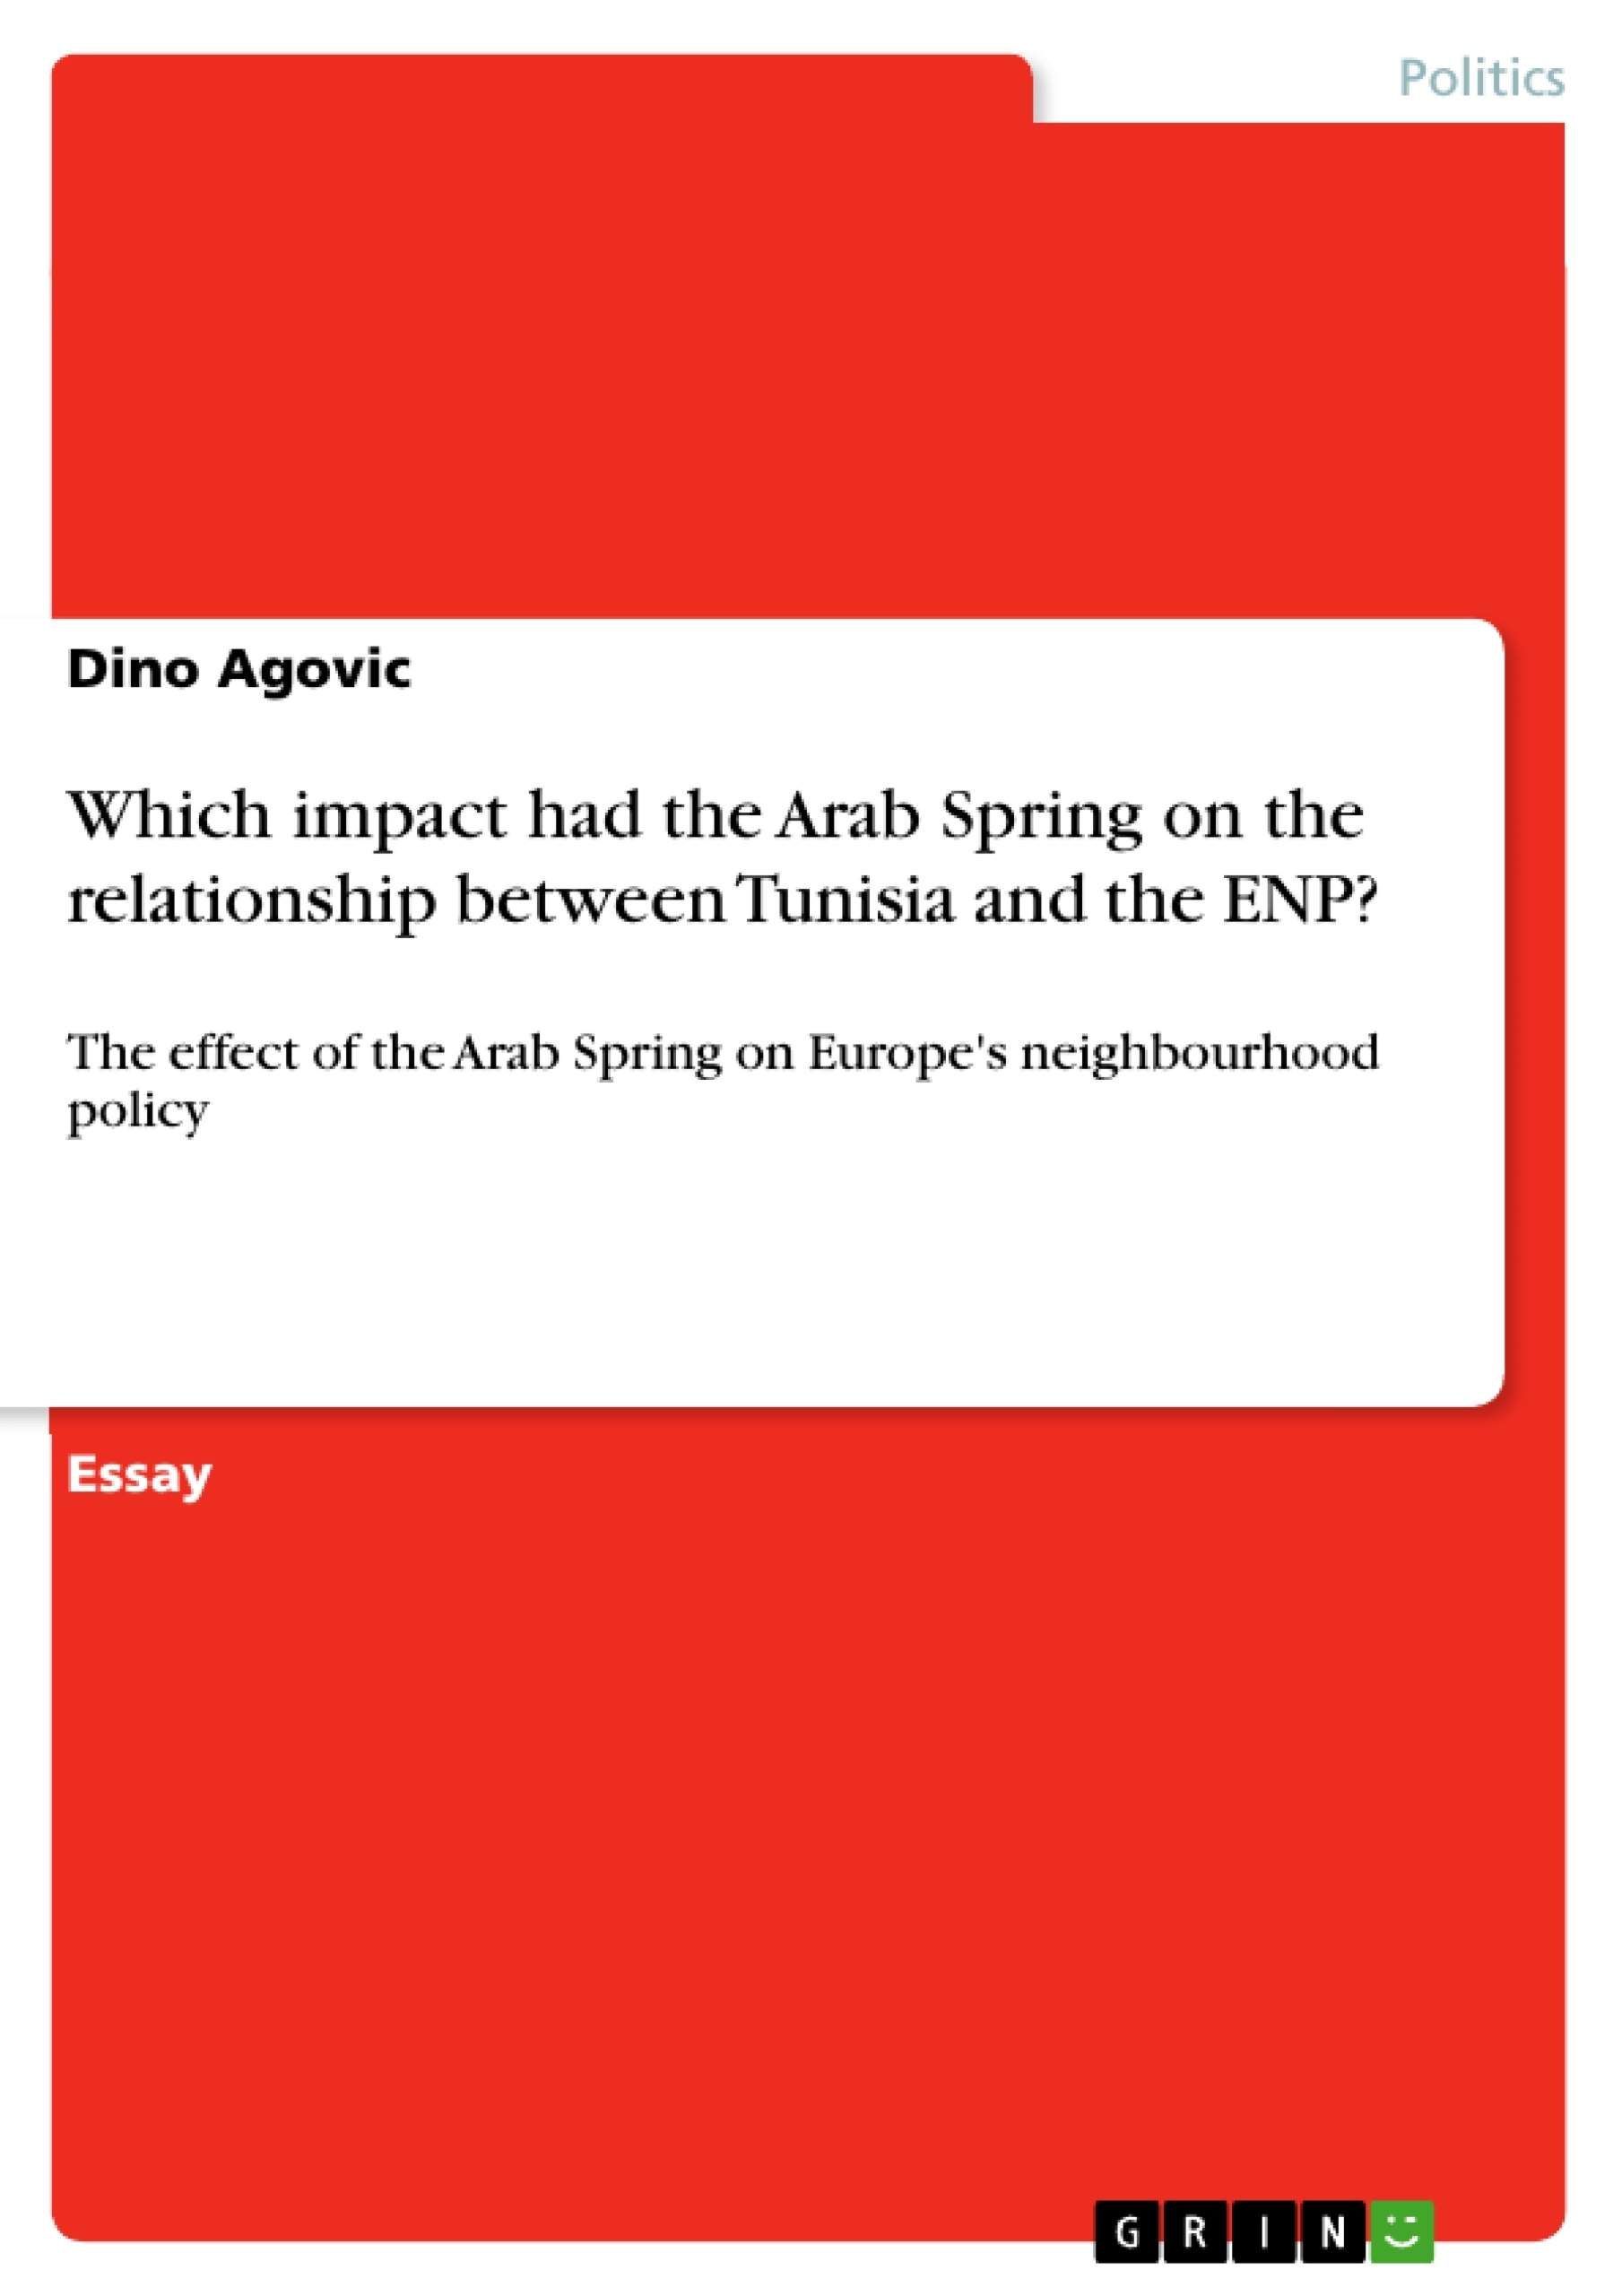 Titre: Which impact had the Arab Spring on the relationship between Tunisia and the ENP?